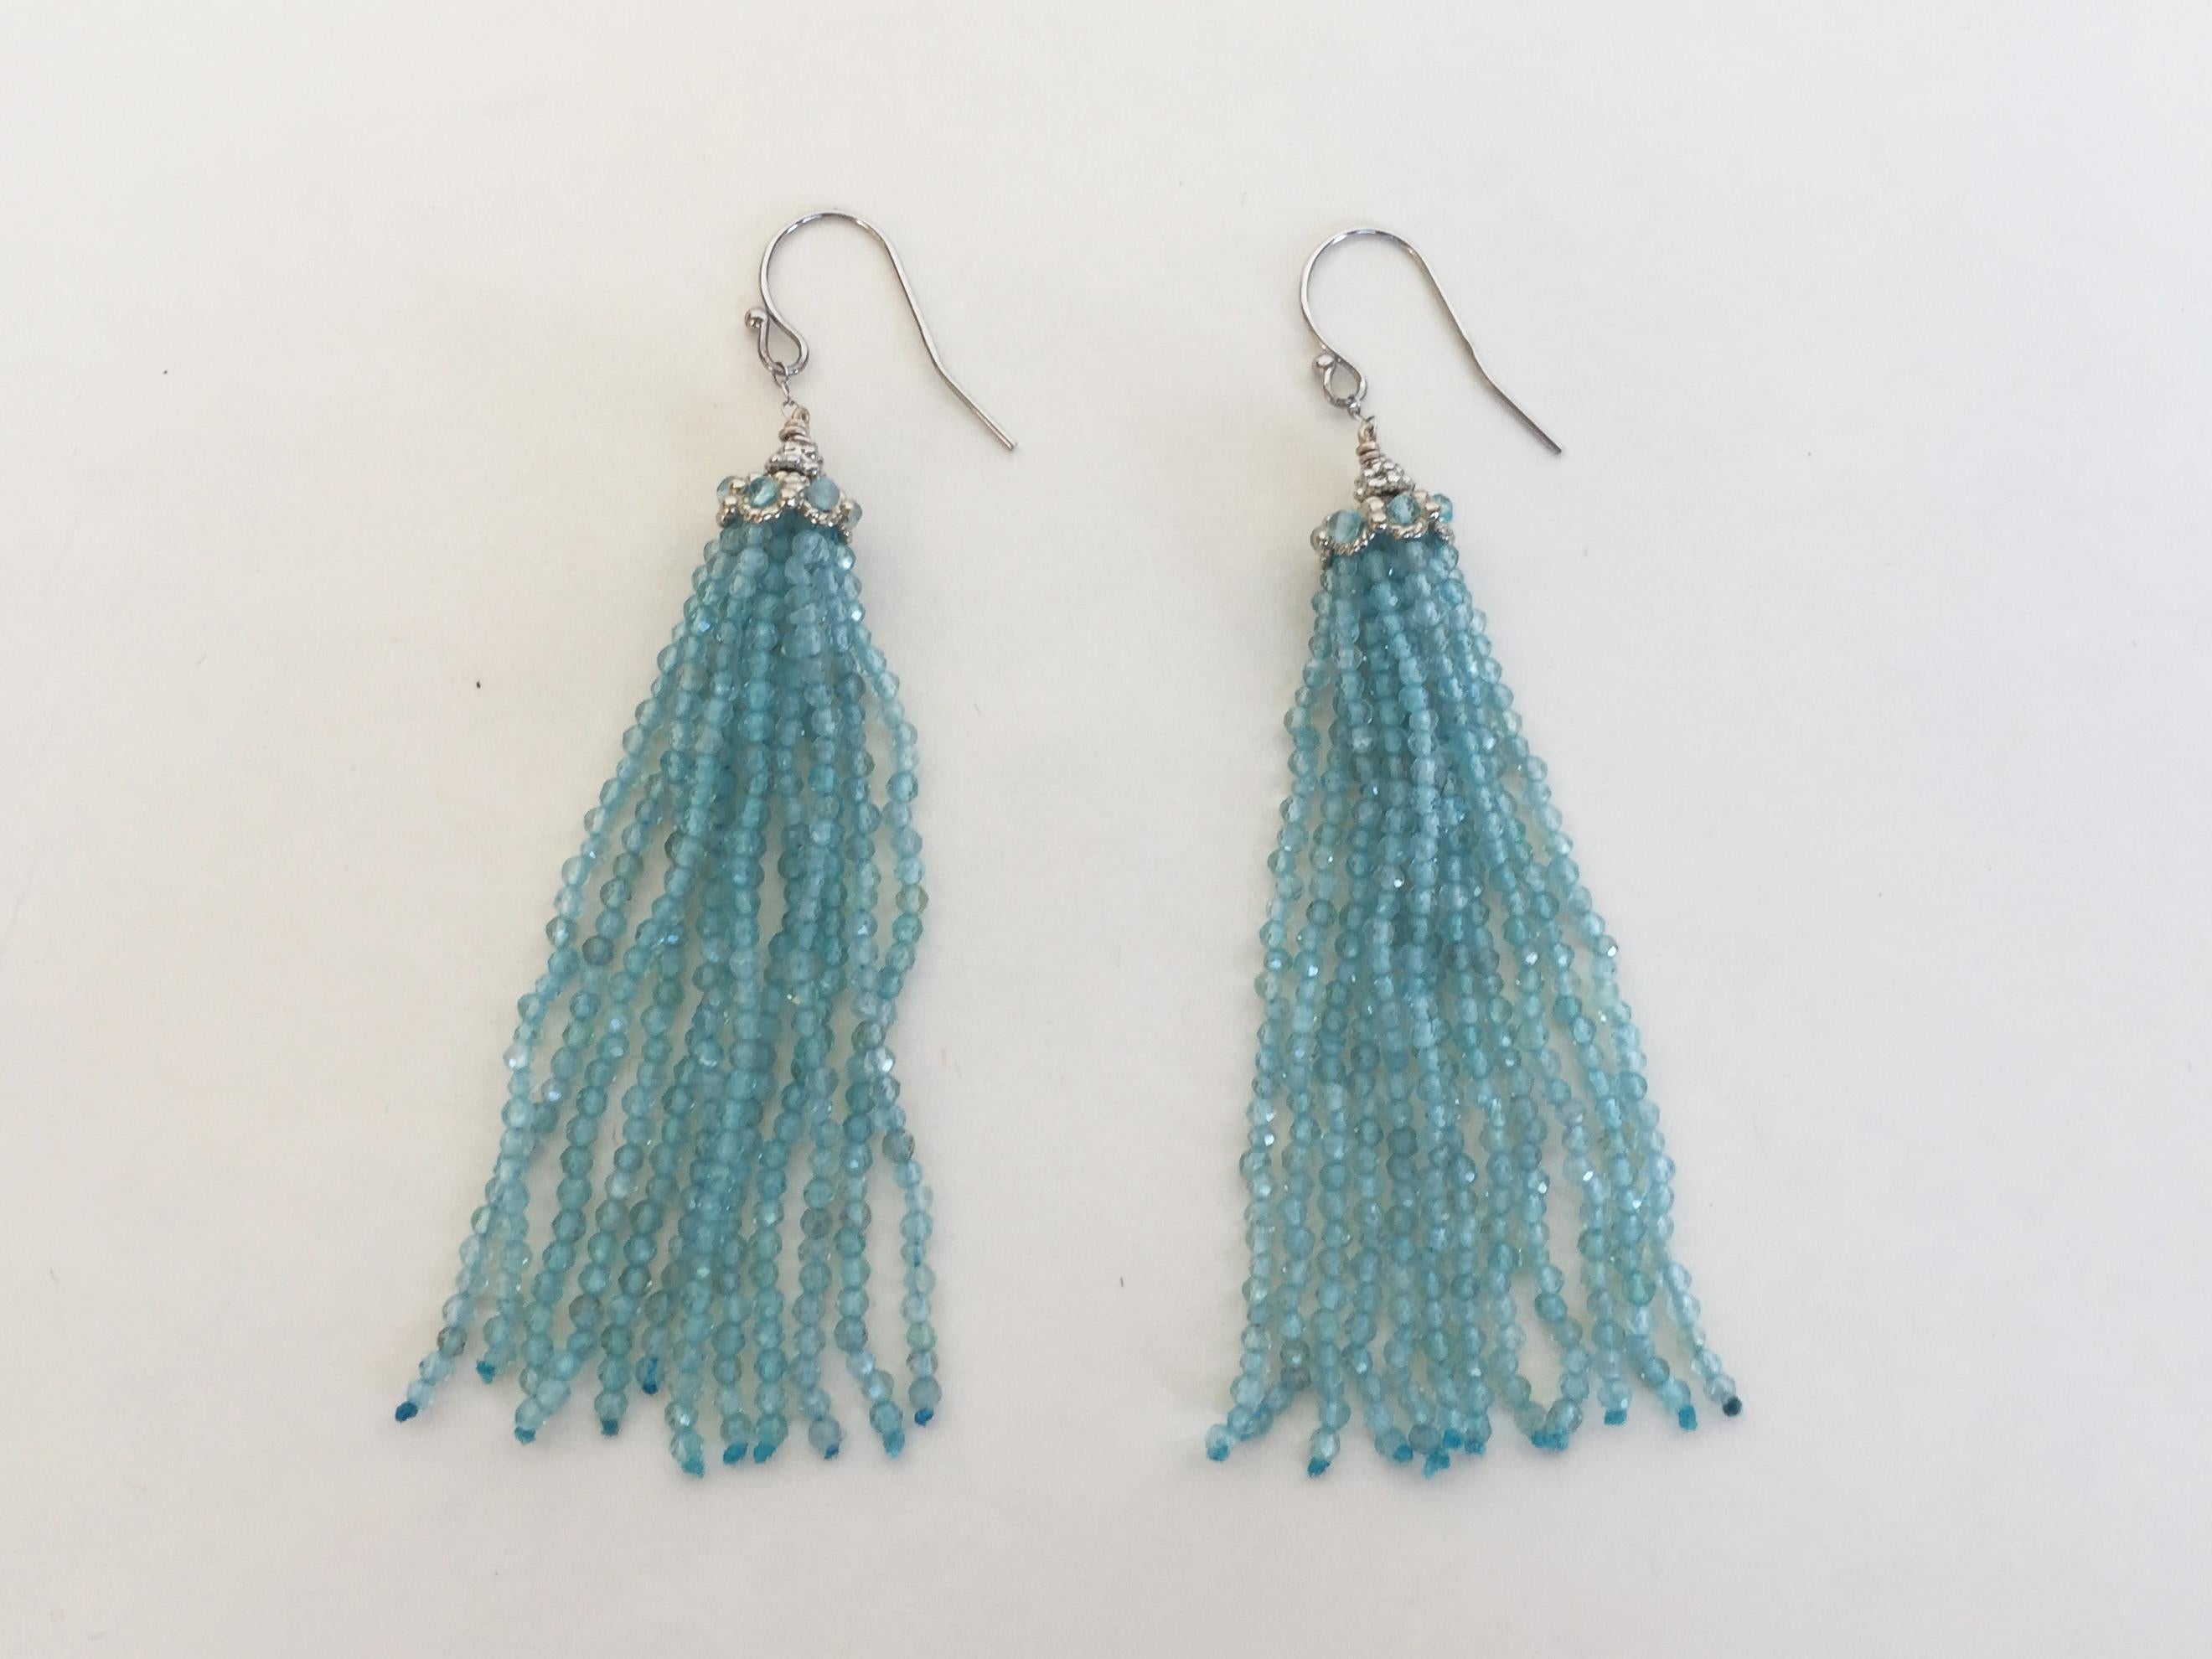 Women's Marina J Faceted Aquamarine Tassel Earrings with 14 K White Gold Chain and Hook